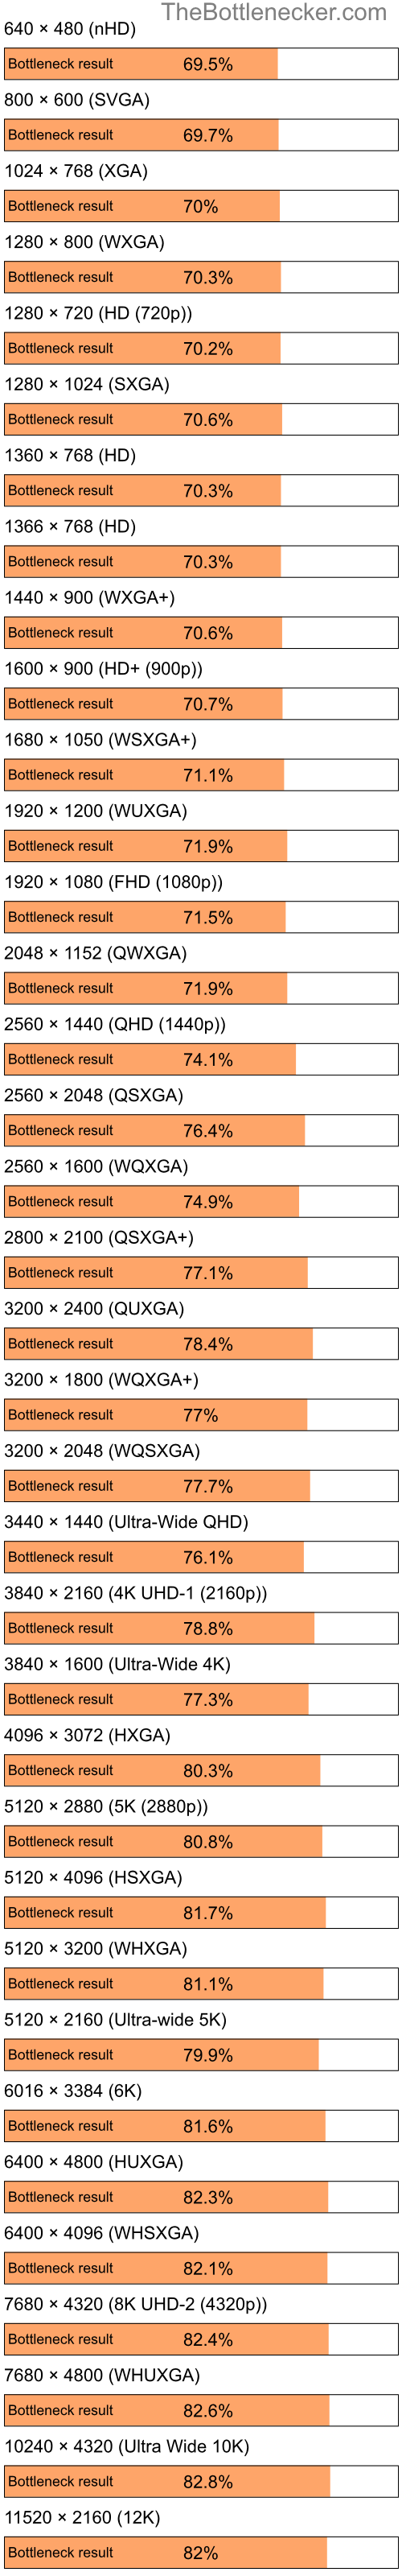 Bottleneck results by resolution for Intel Celeron and NVIDIA GeForce 9400M in Graphic Card Intense Tasks